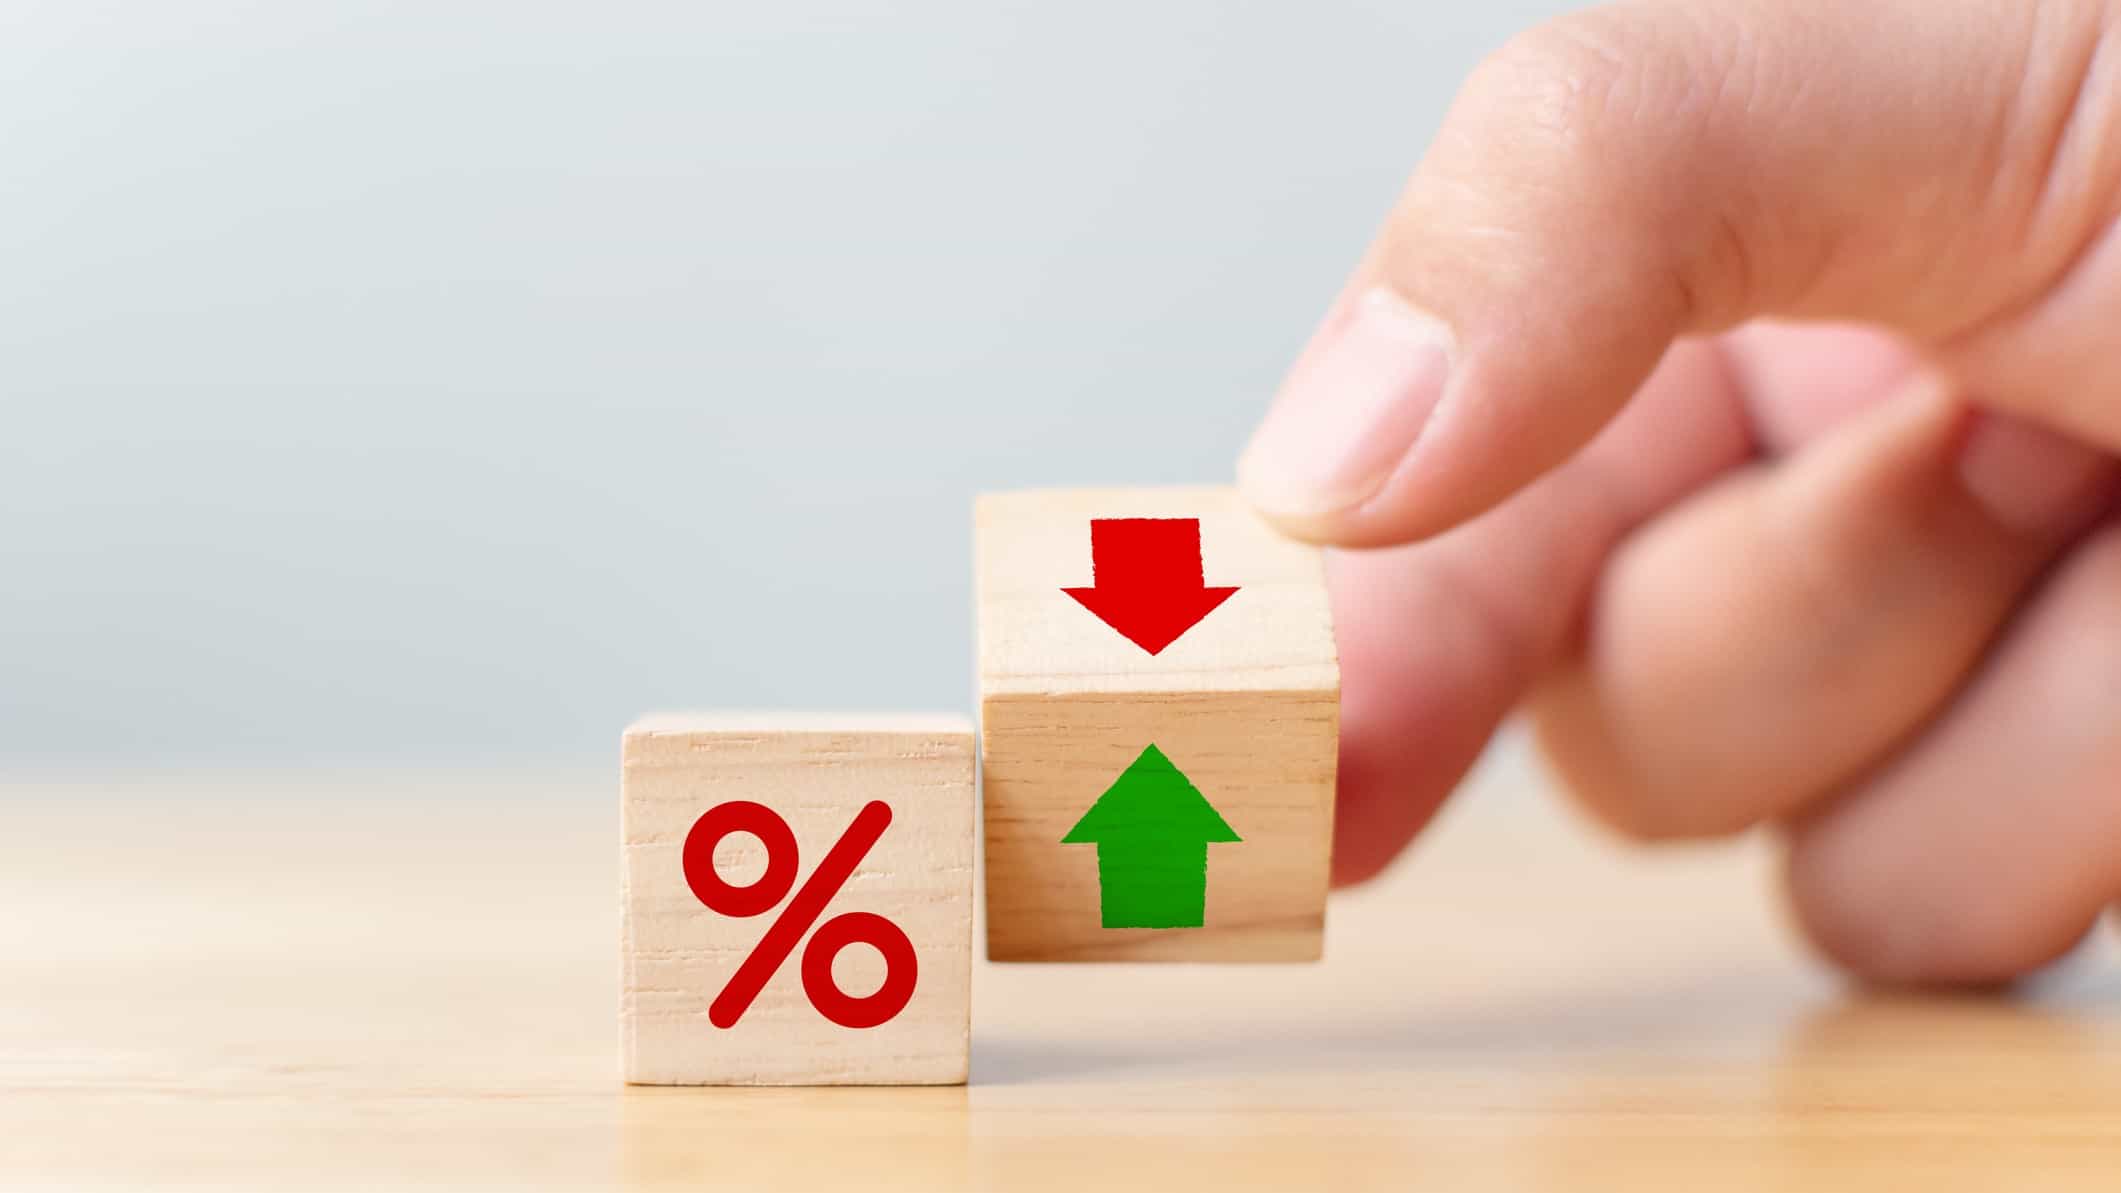 A hand moves a building block from green arrow to red, indicating negative interest rates